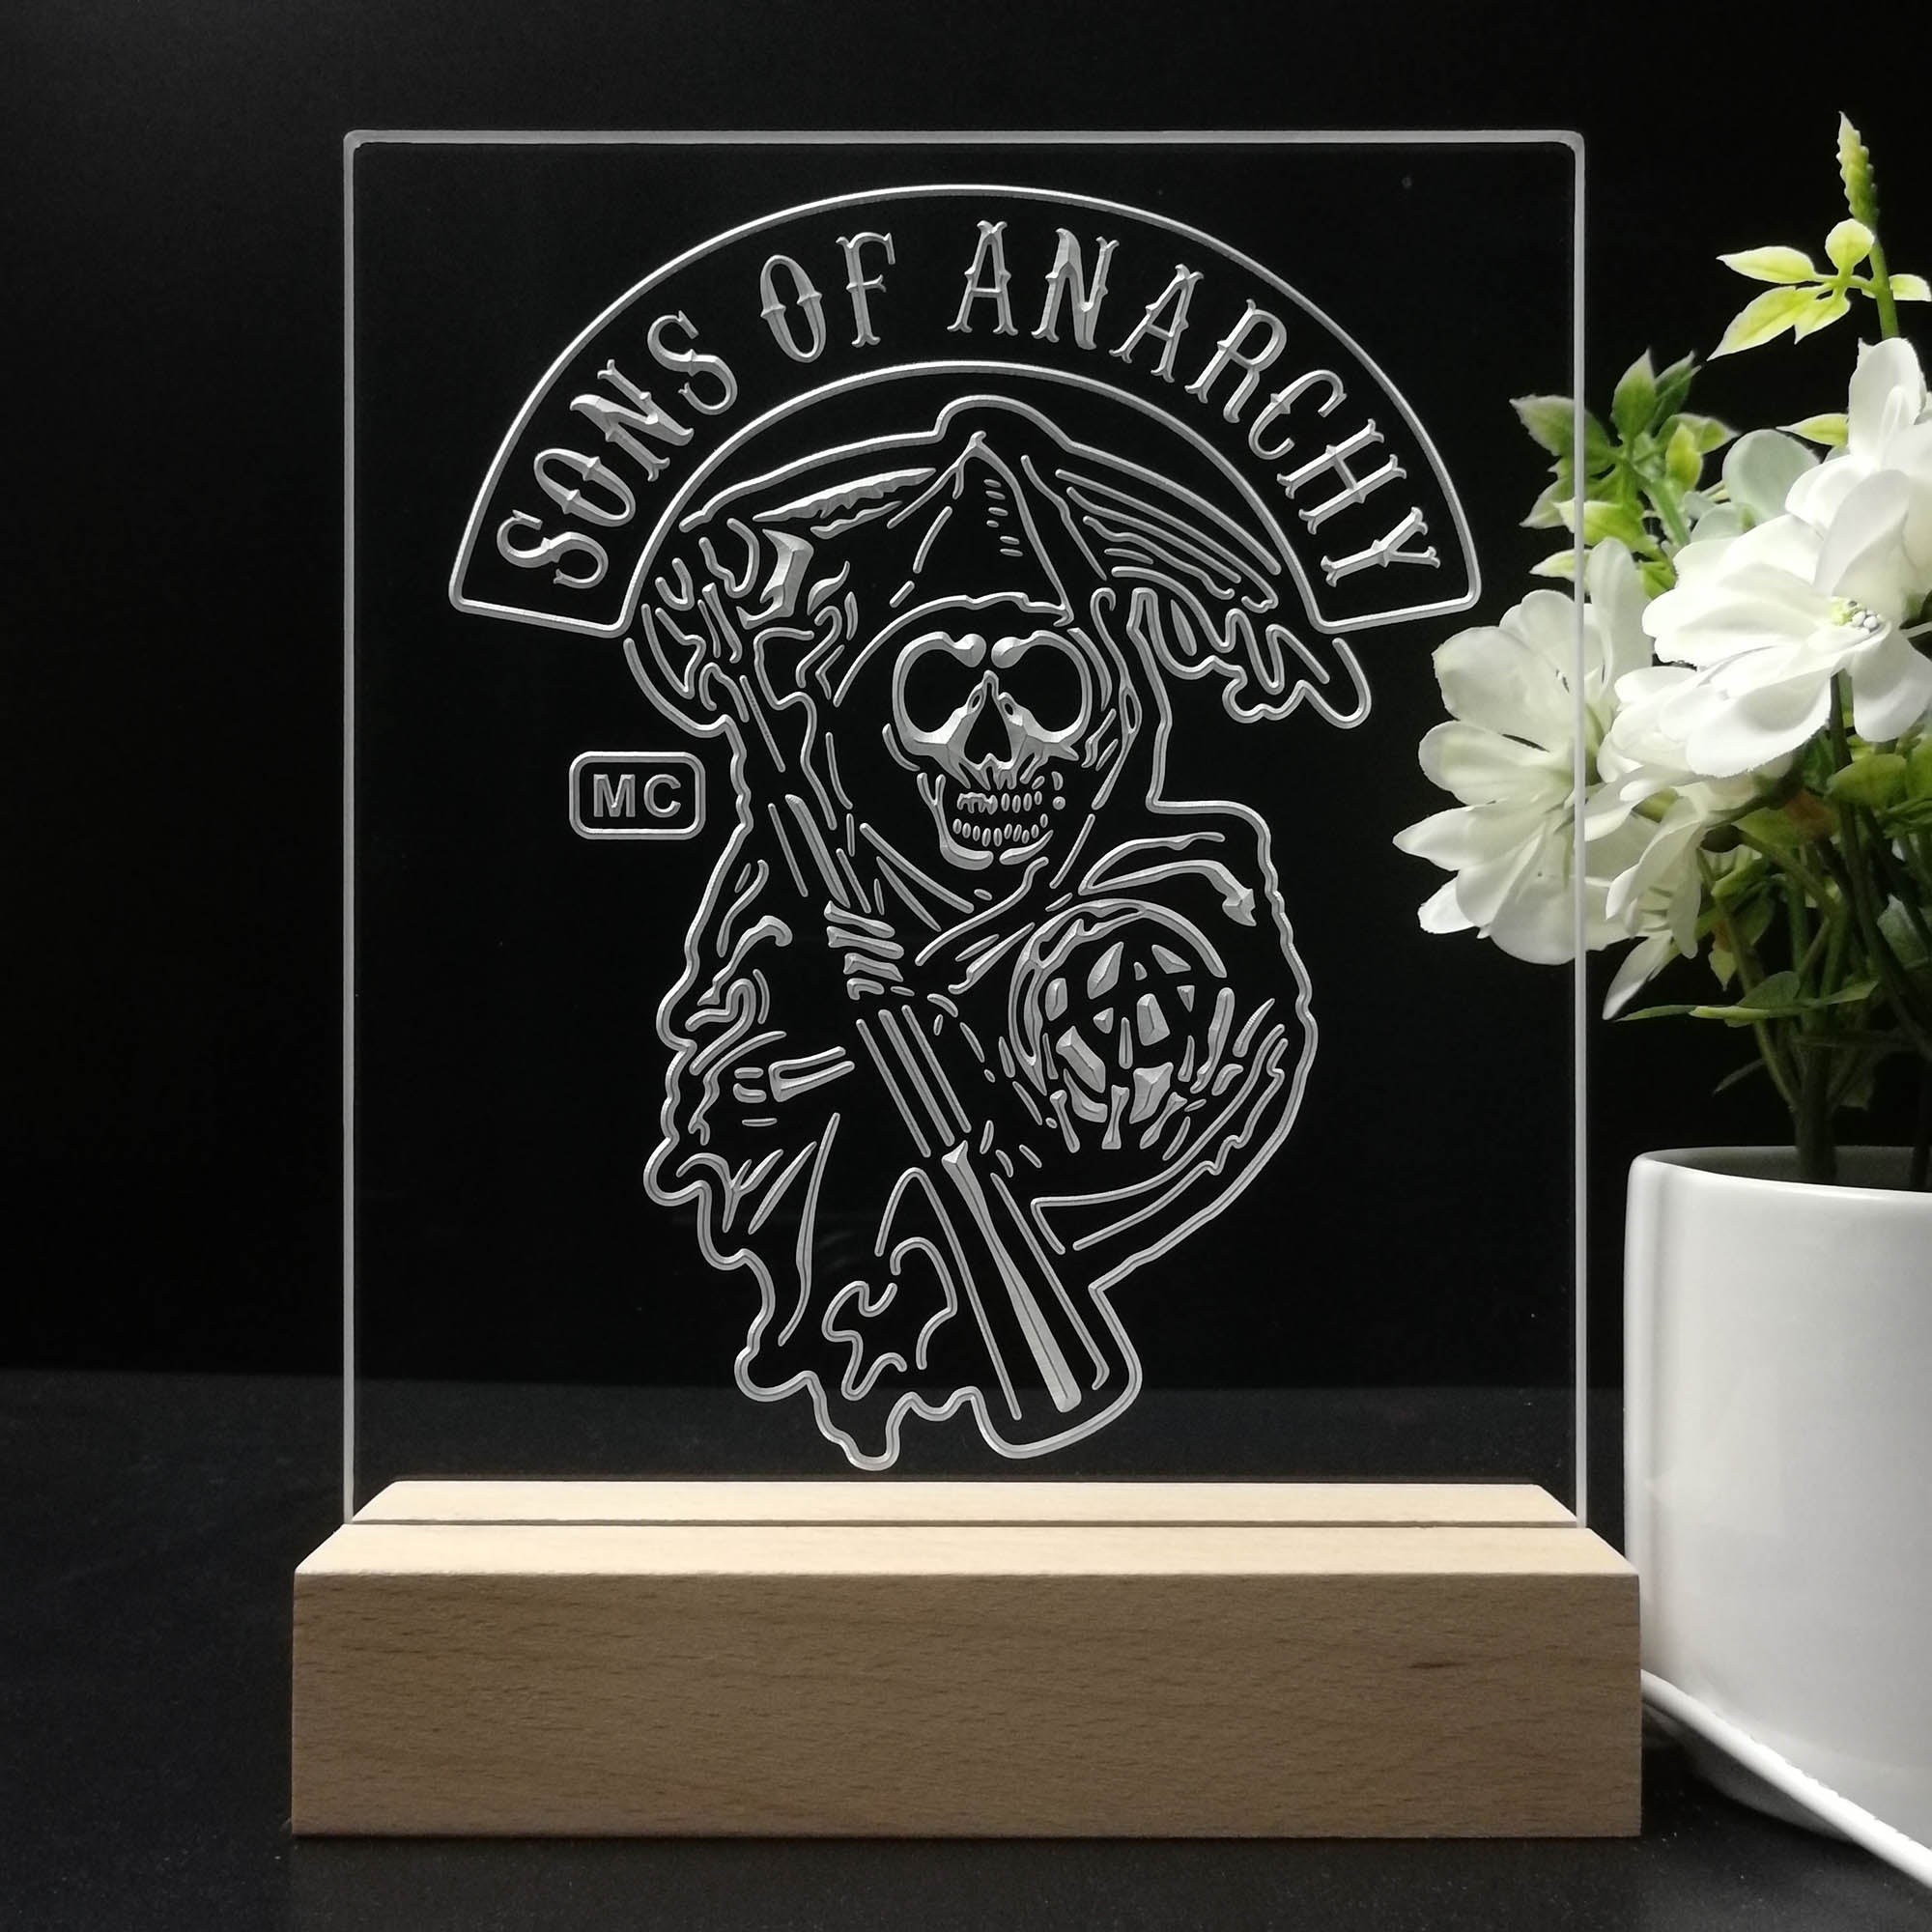 Sons of Anarchy 3D Illusion Night Light Desk Lamp